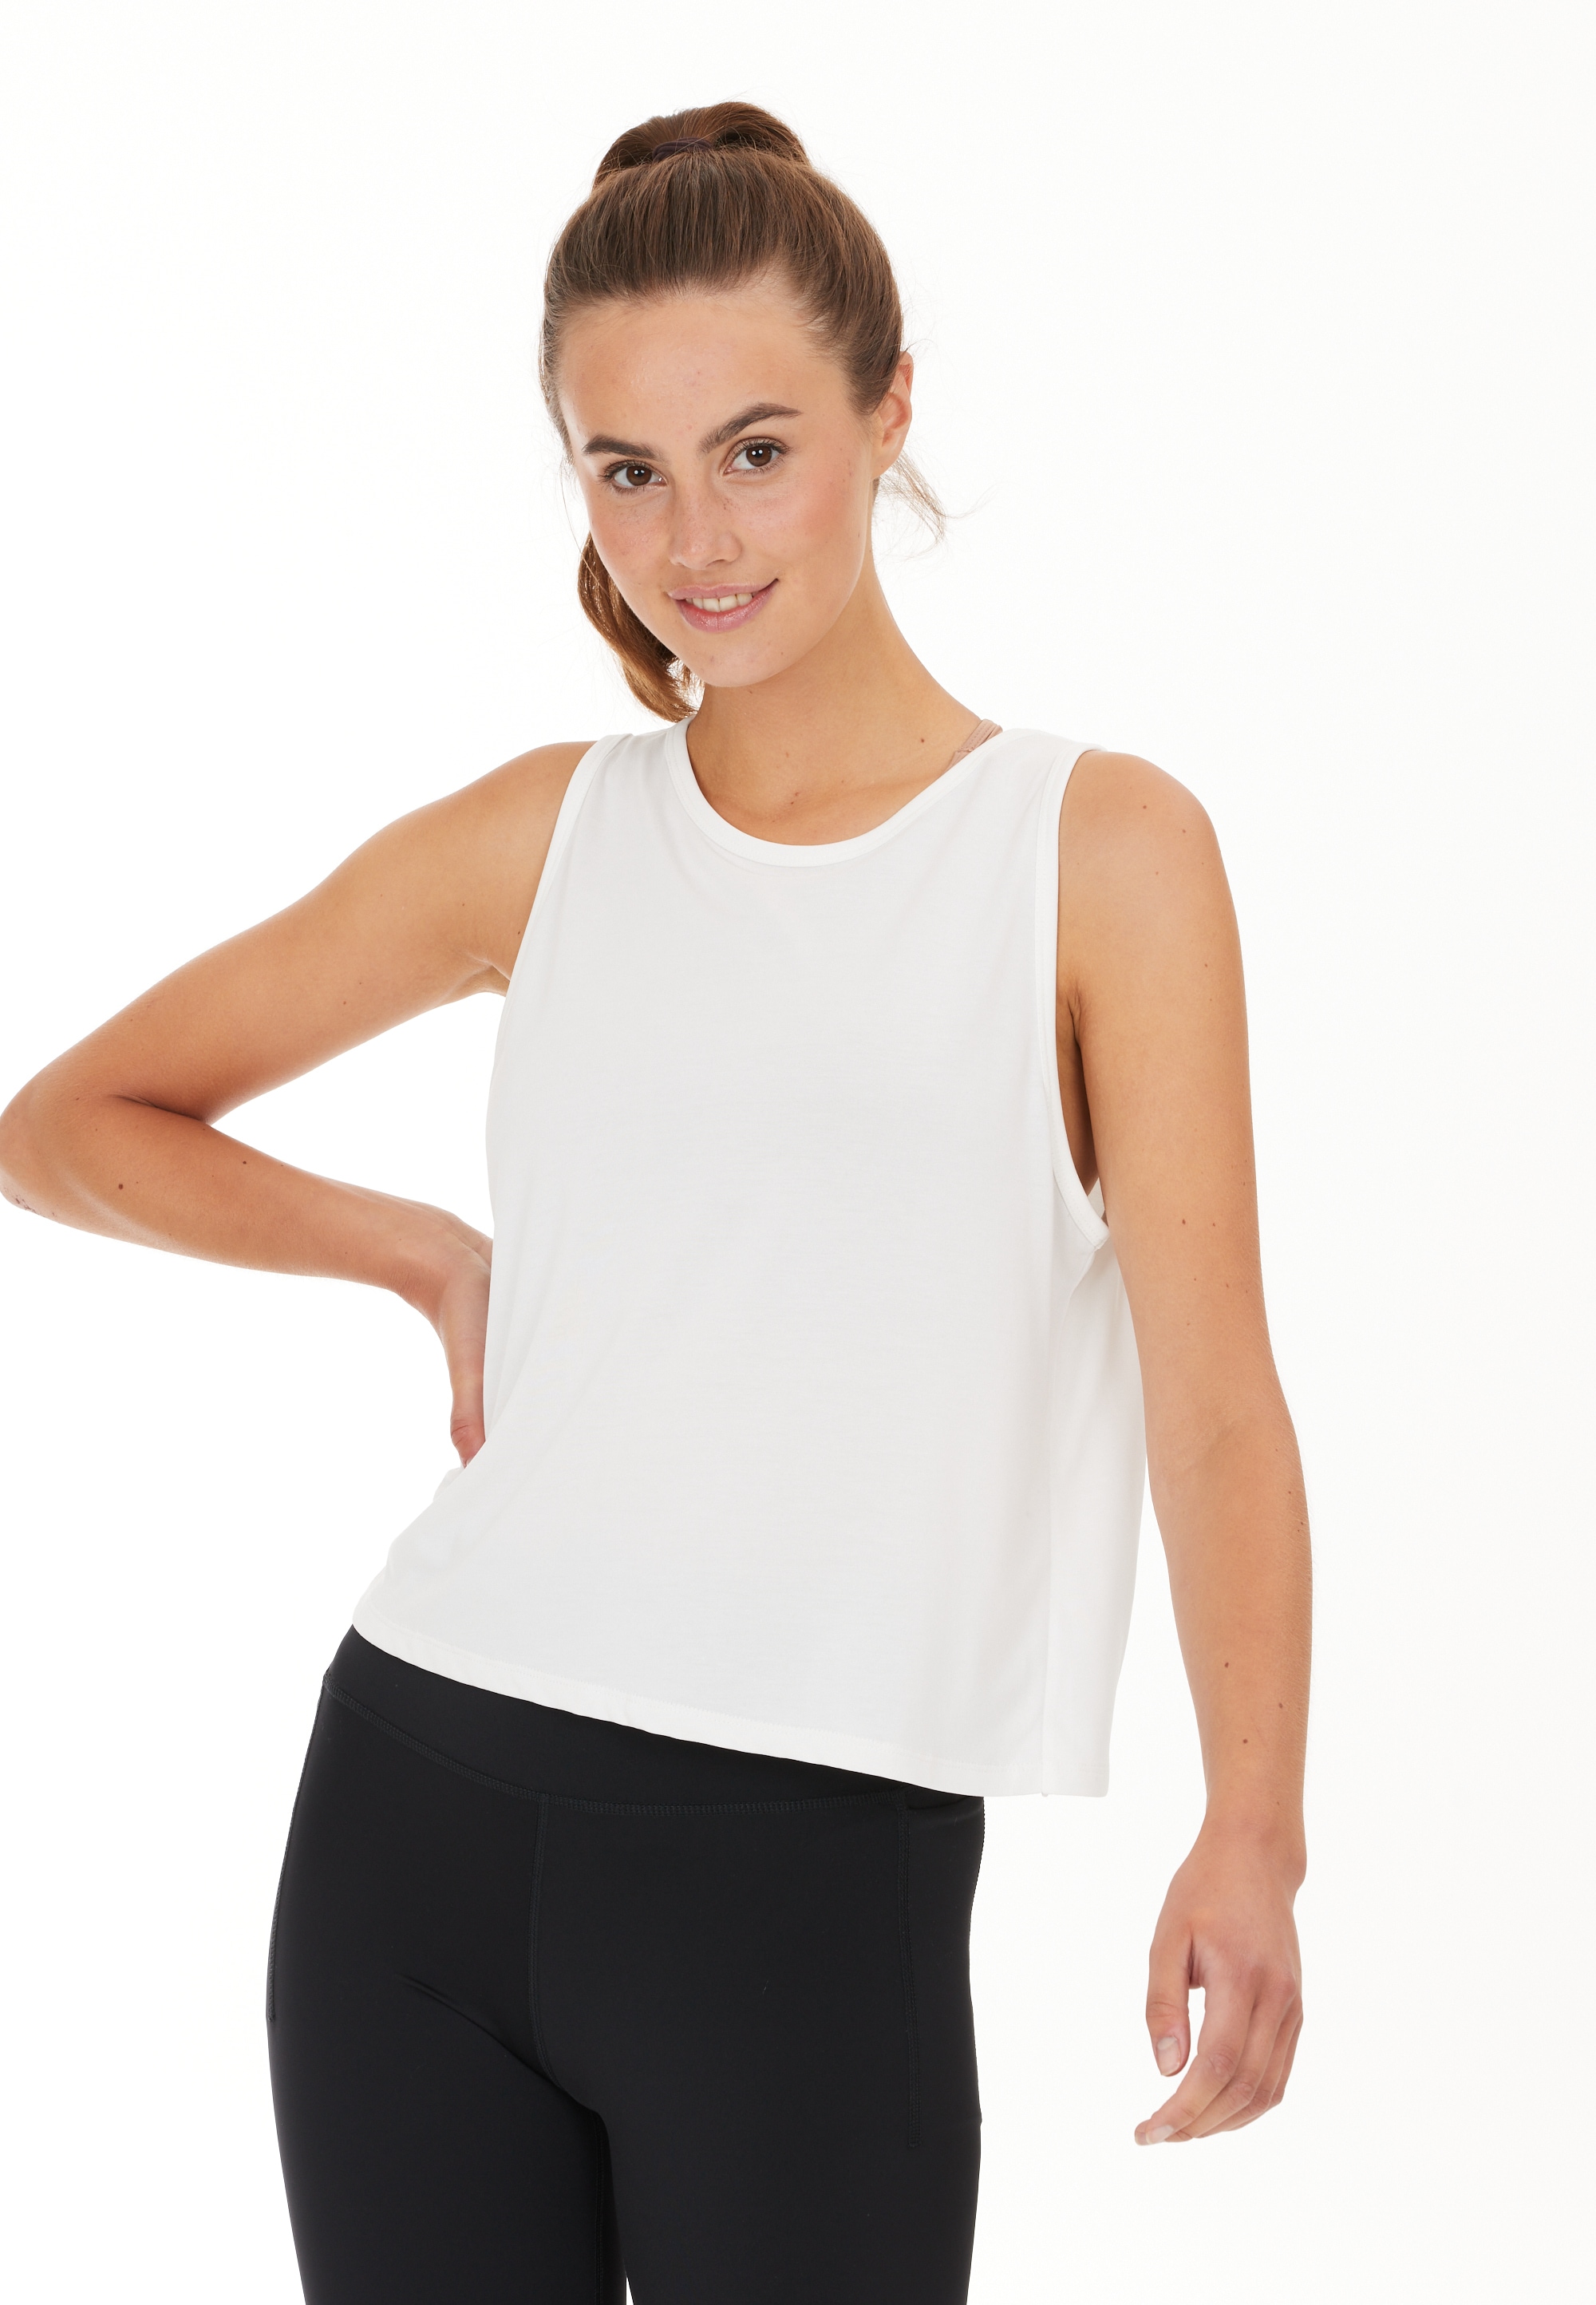 ATHLECIA Tanktop »Sweeky«, mit Quick Dry-Funktion